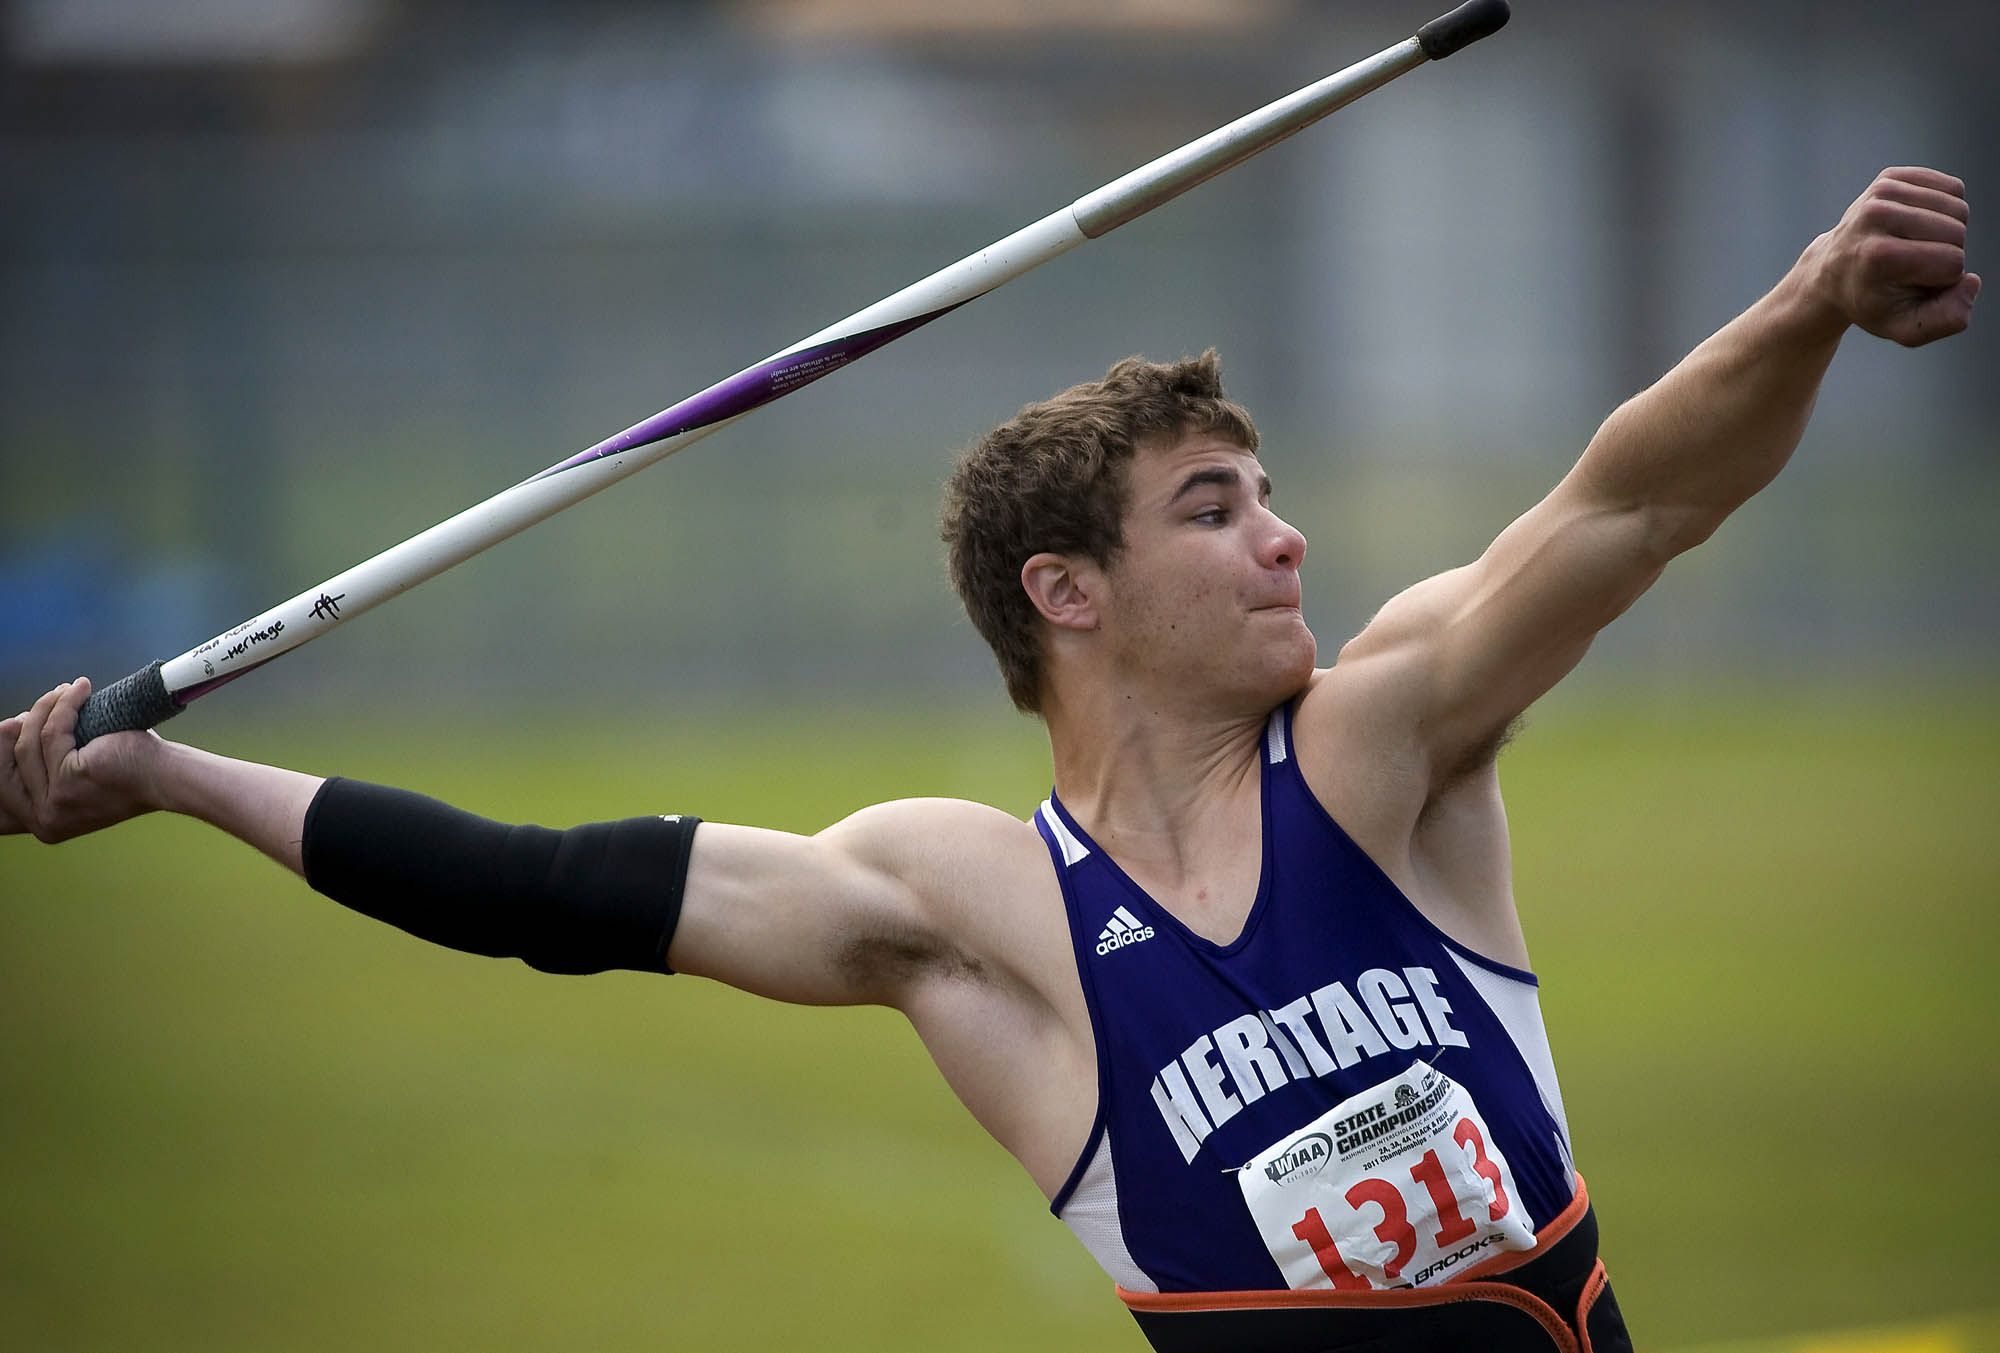 Heritage's Sean Keller cruises to a state title in the javelin at the 4A State Track and Field Championships at Mount Tahoma High School in Tacoma on Saturday.